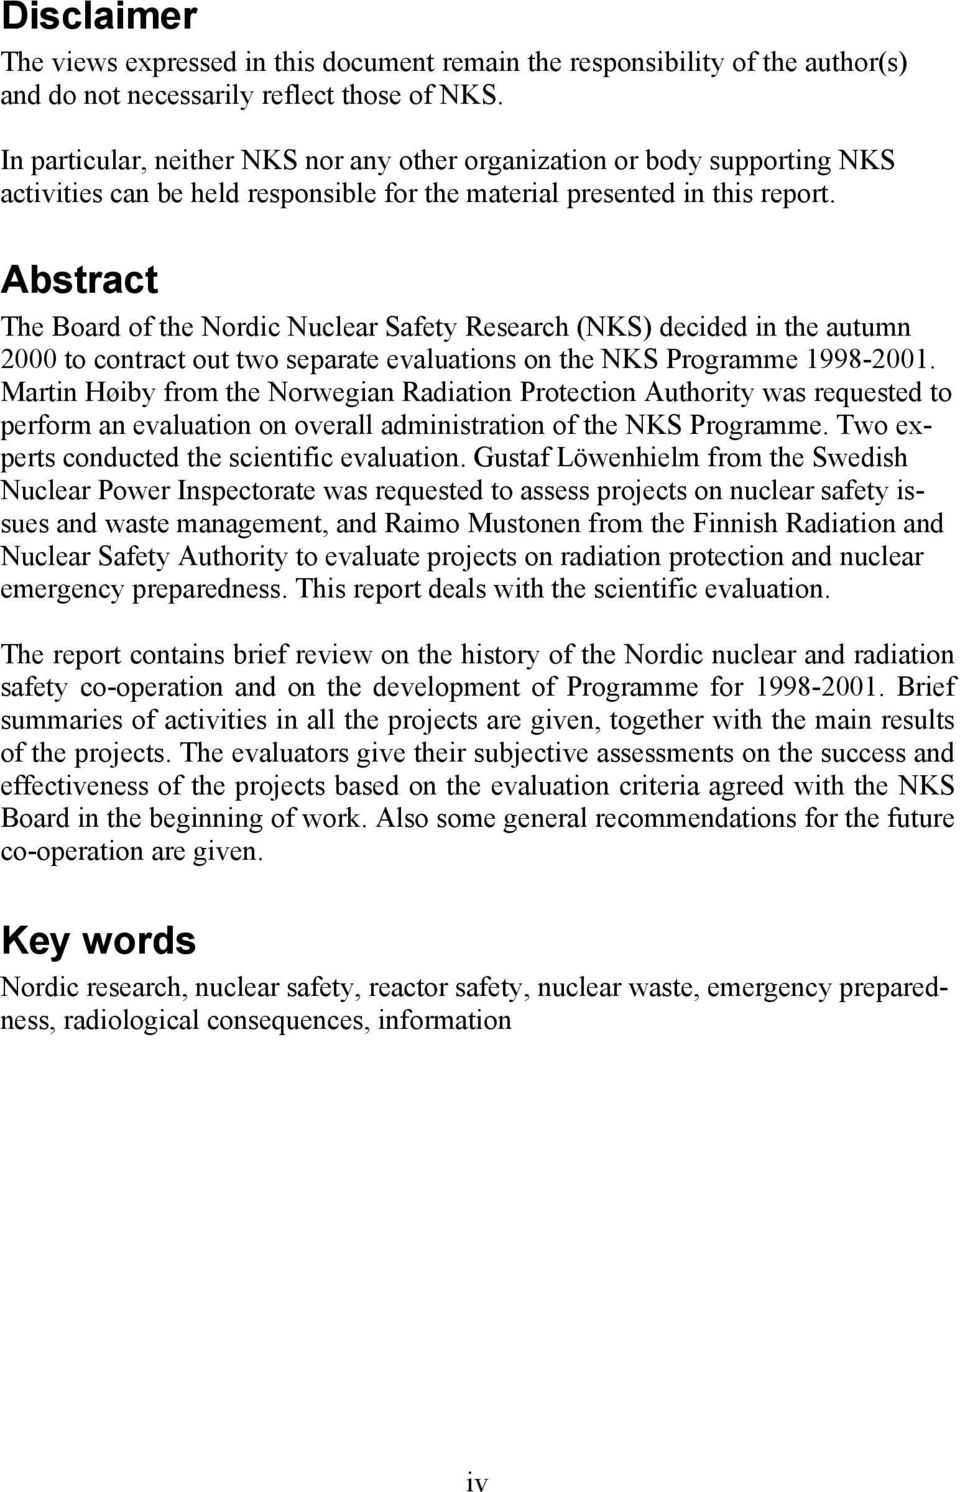 Abstract The Board of the Nordic Nuclear Safety Research (NKS) decided in the autumn 2000 to contract out two separate evaluations on the NKS Programme 1998-2001.